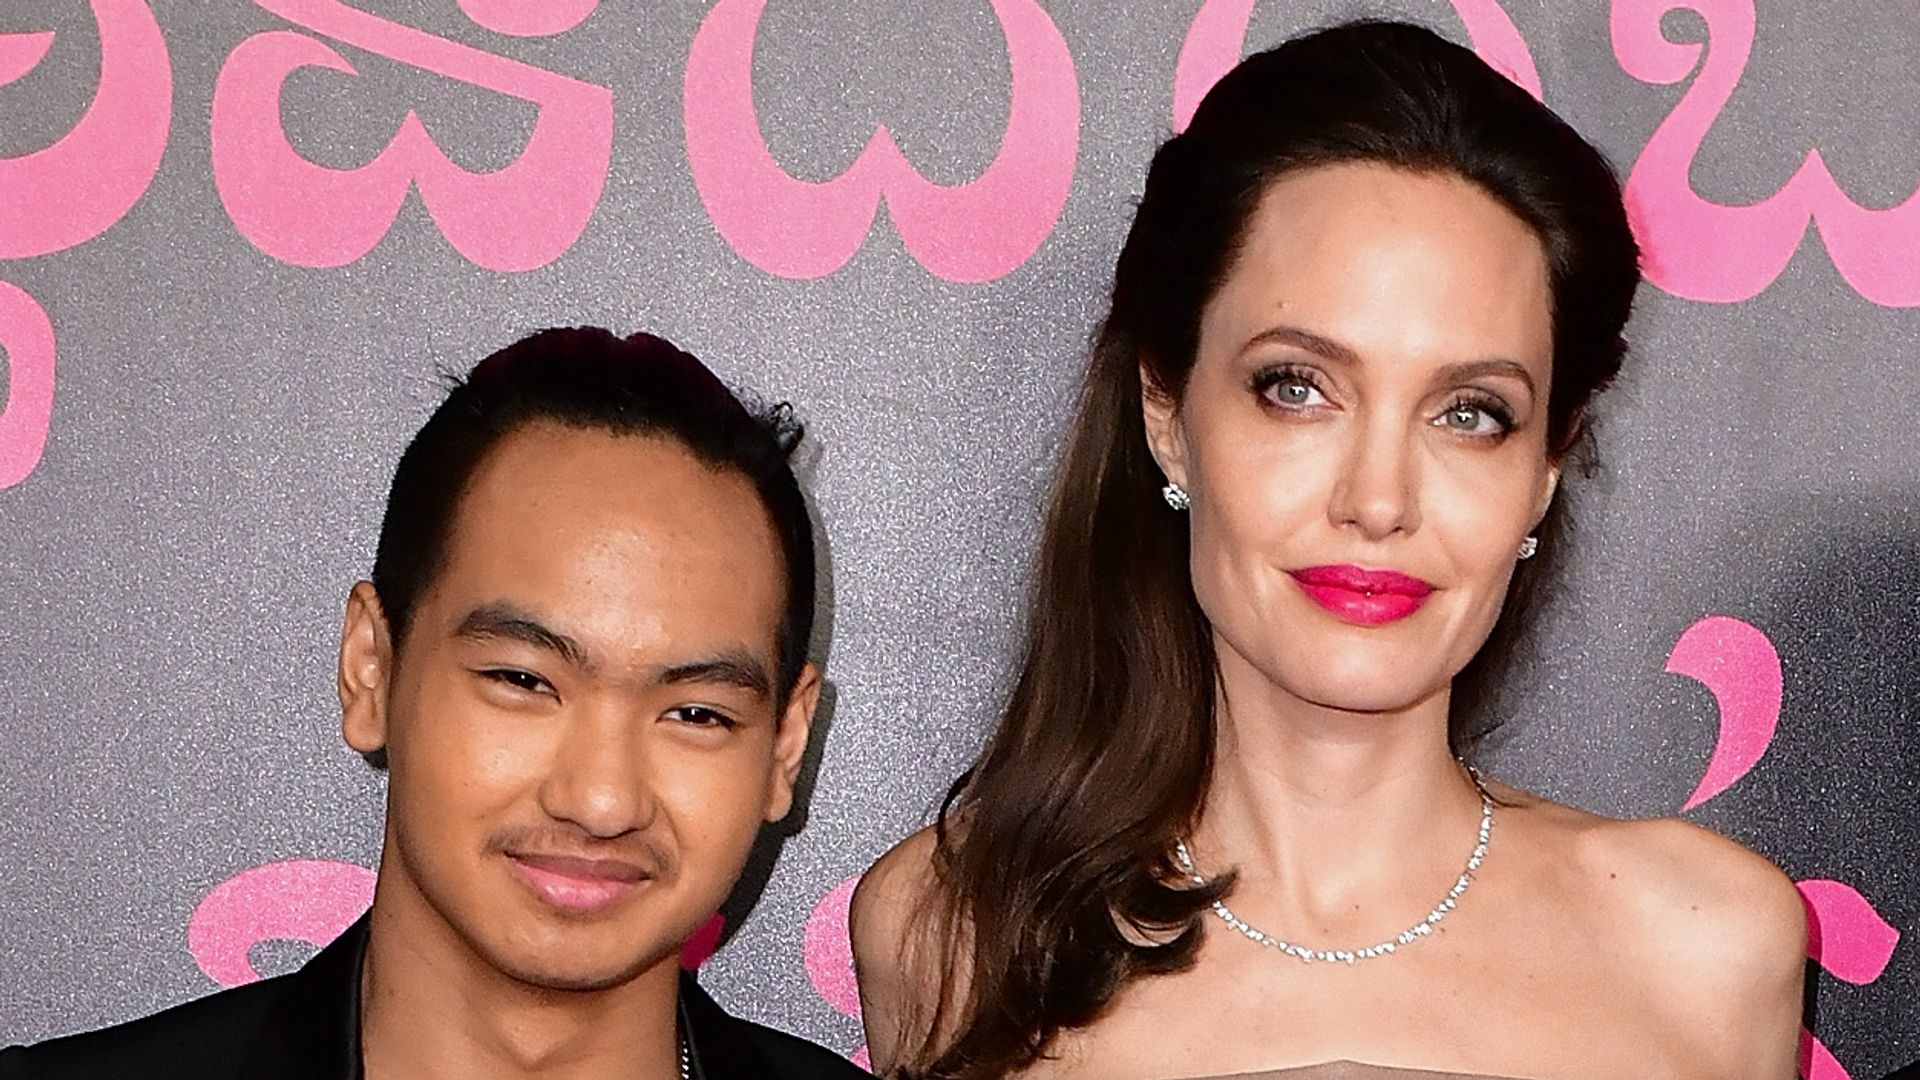 Angelina Jolie and her son Maddox in 2017